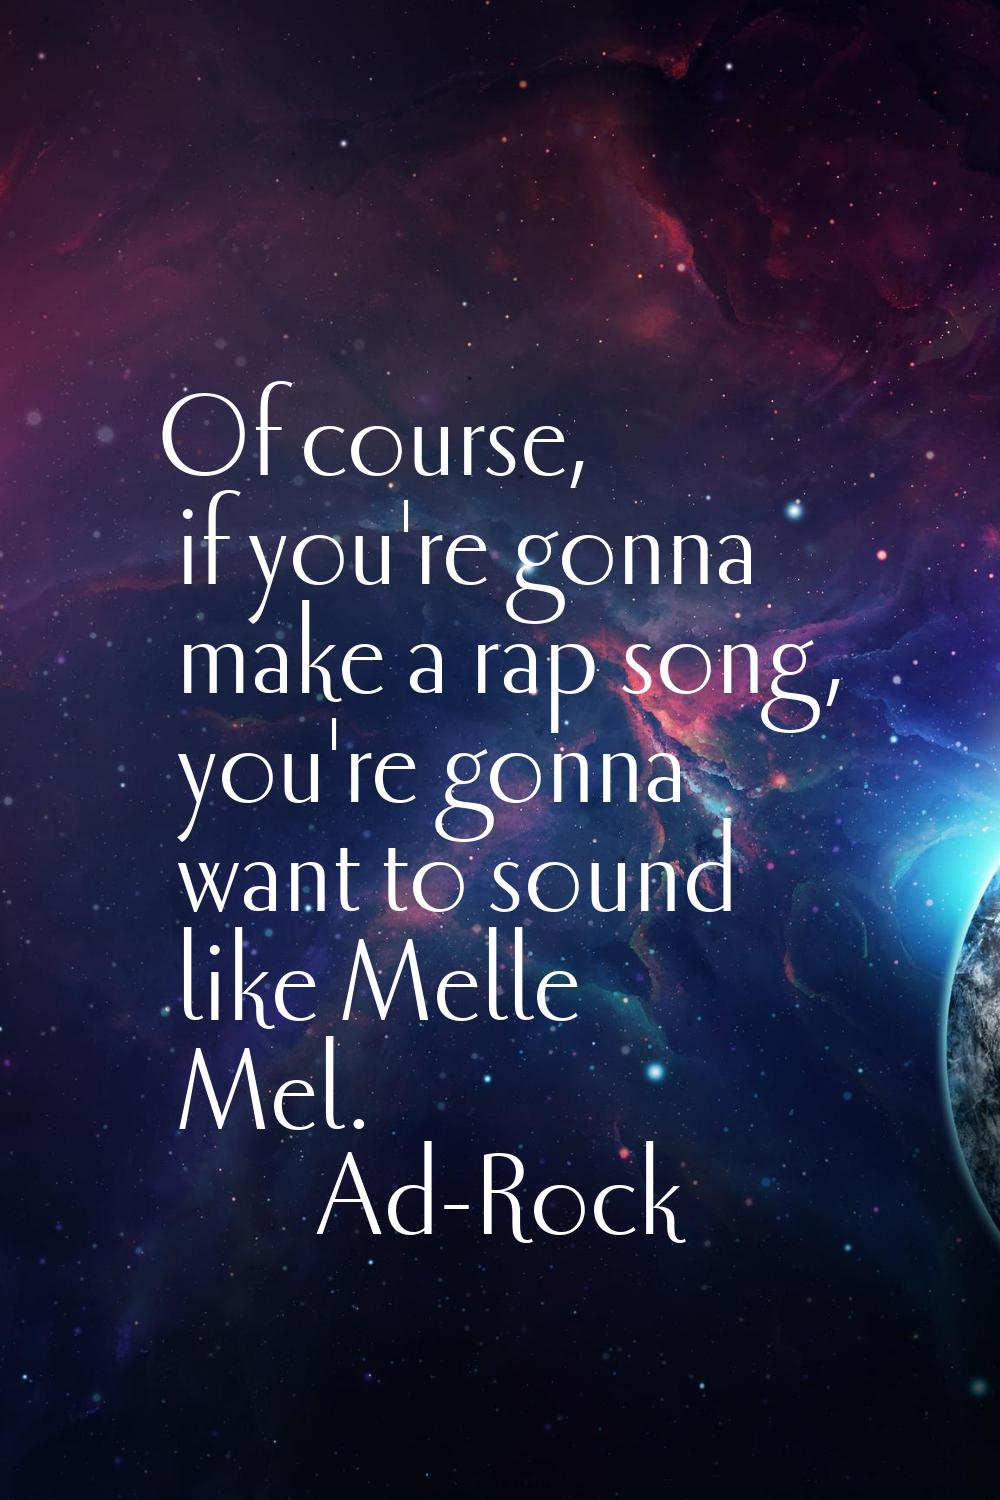 Of course, if you're gonna make a rap song, you're gonna want to sound like Melle Mel.